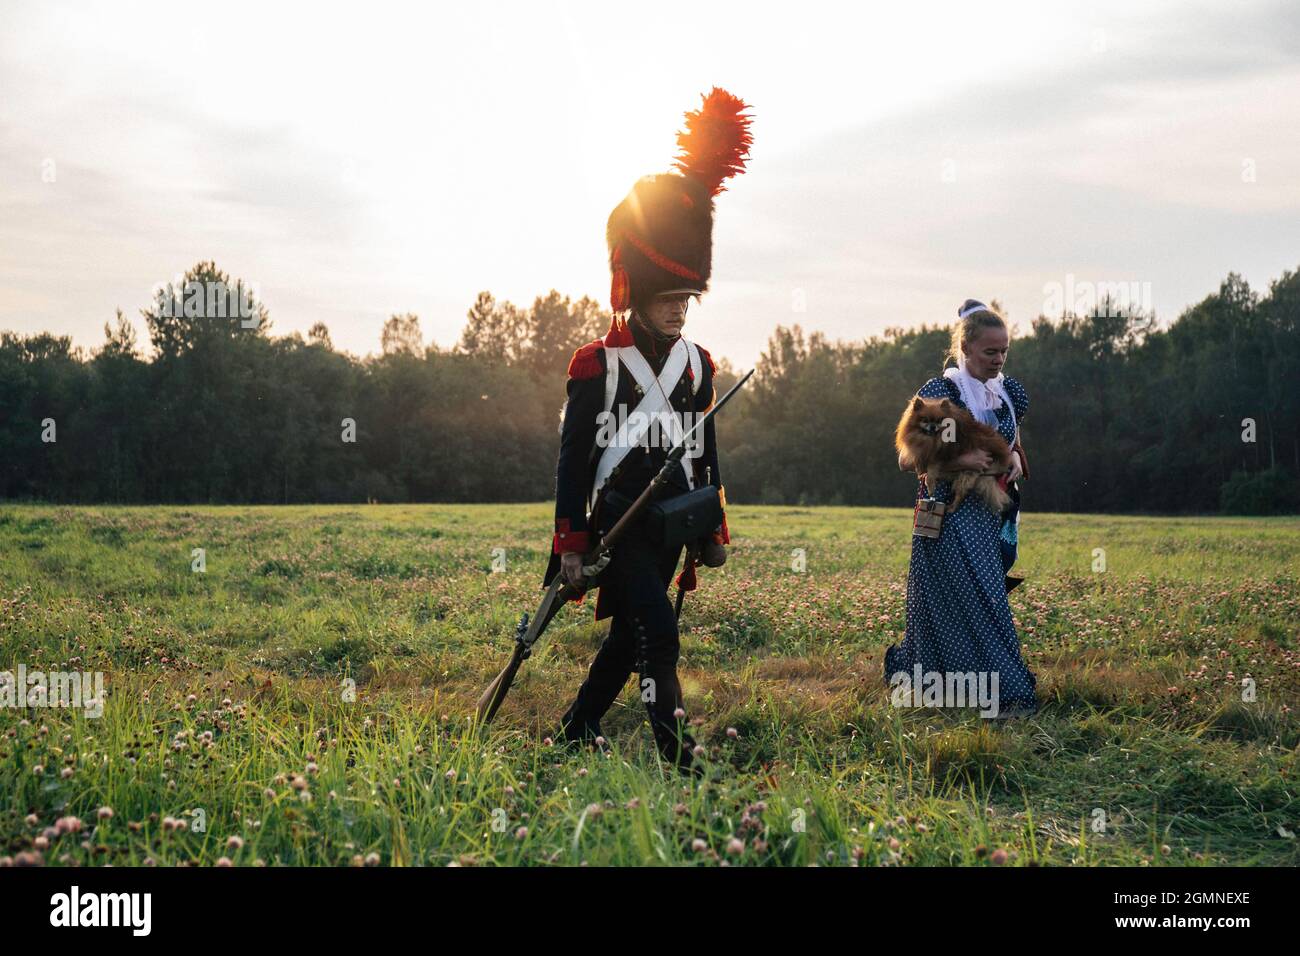 MOSCOW, RUSSIA - Sep 01, 2018: The reenactment of the Battle of Borodino in Russia Stock Photo